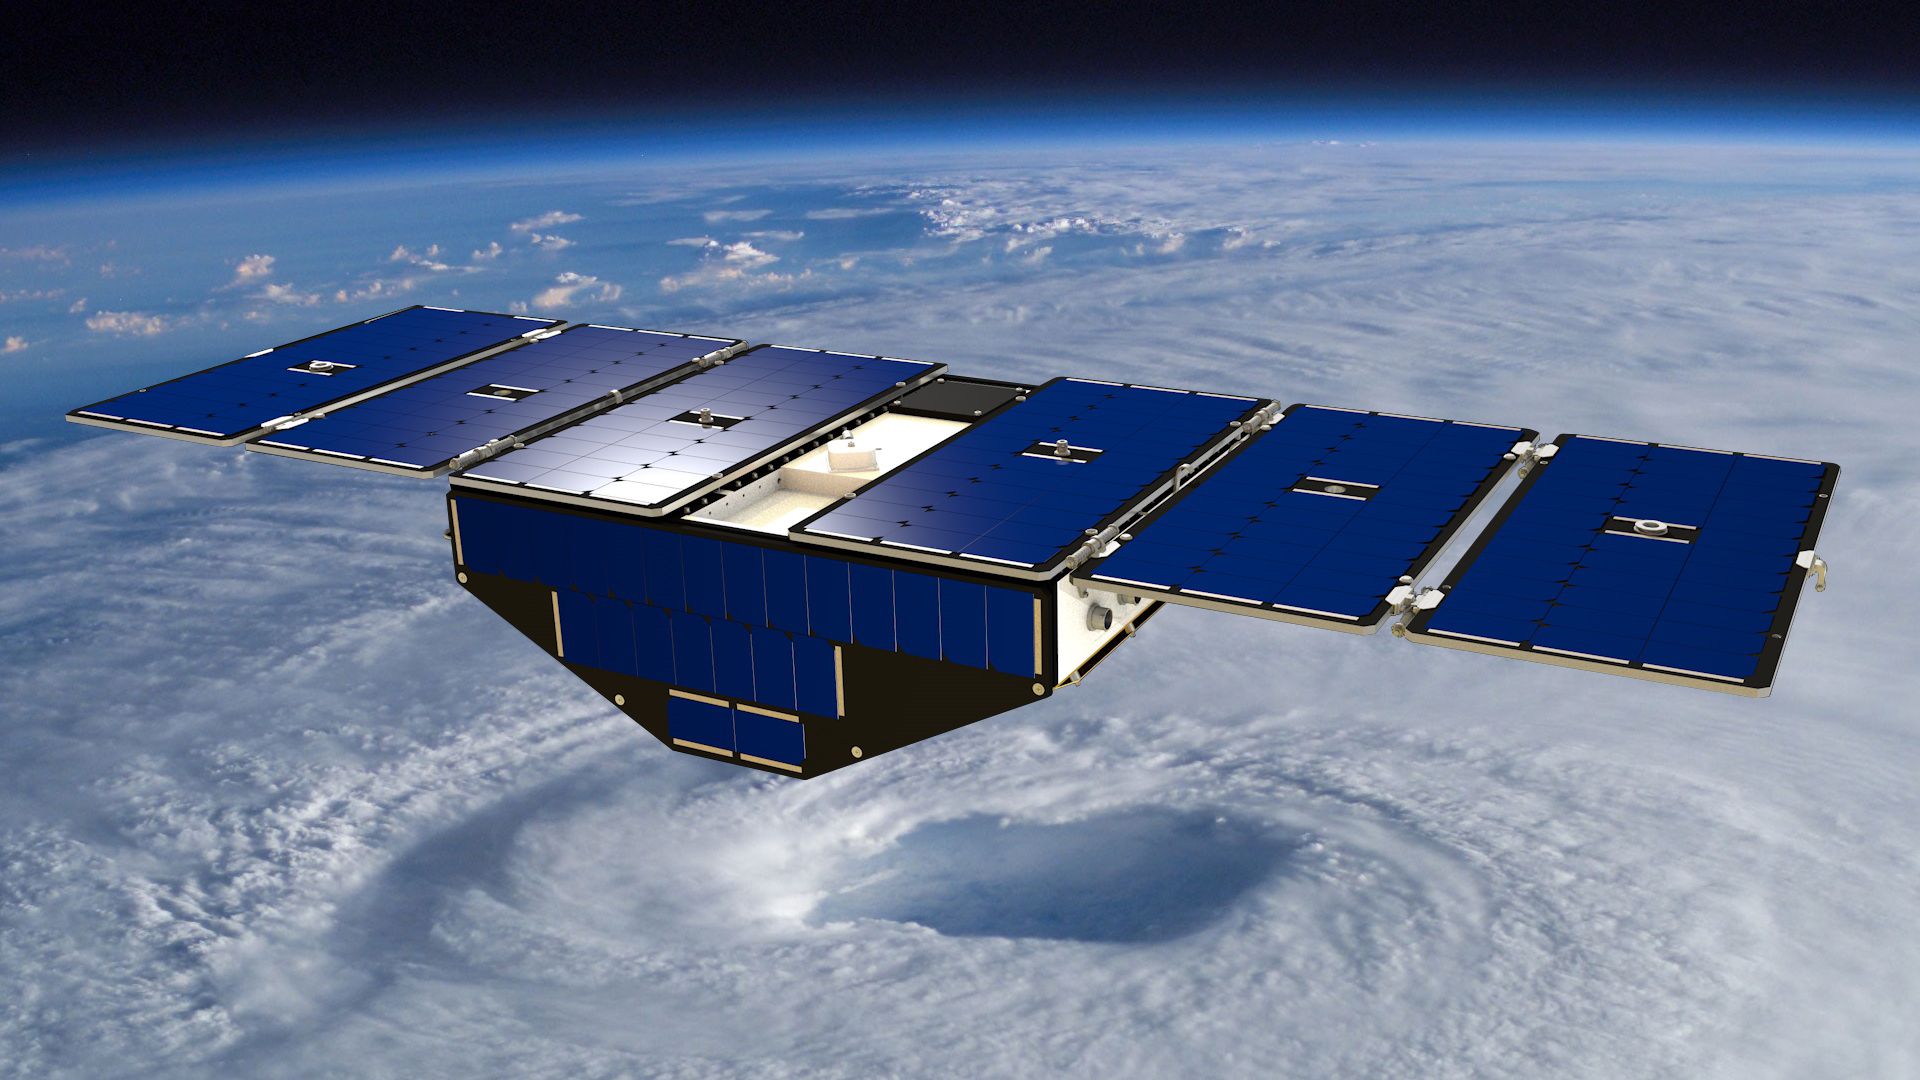 Illustration of one of the CYGNSS spacecraft over an astronaut photo of a hurricane. The spacecraft is mostly blue, with one long solar panel that runs along its back and out both sides, like bird wings. Below the solar panel, a blue pentagon looks like an upside down house. 